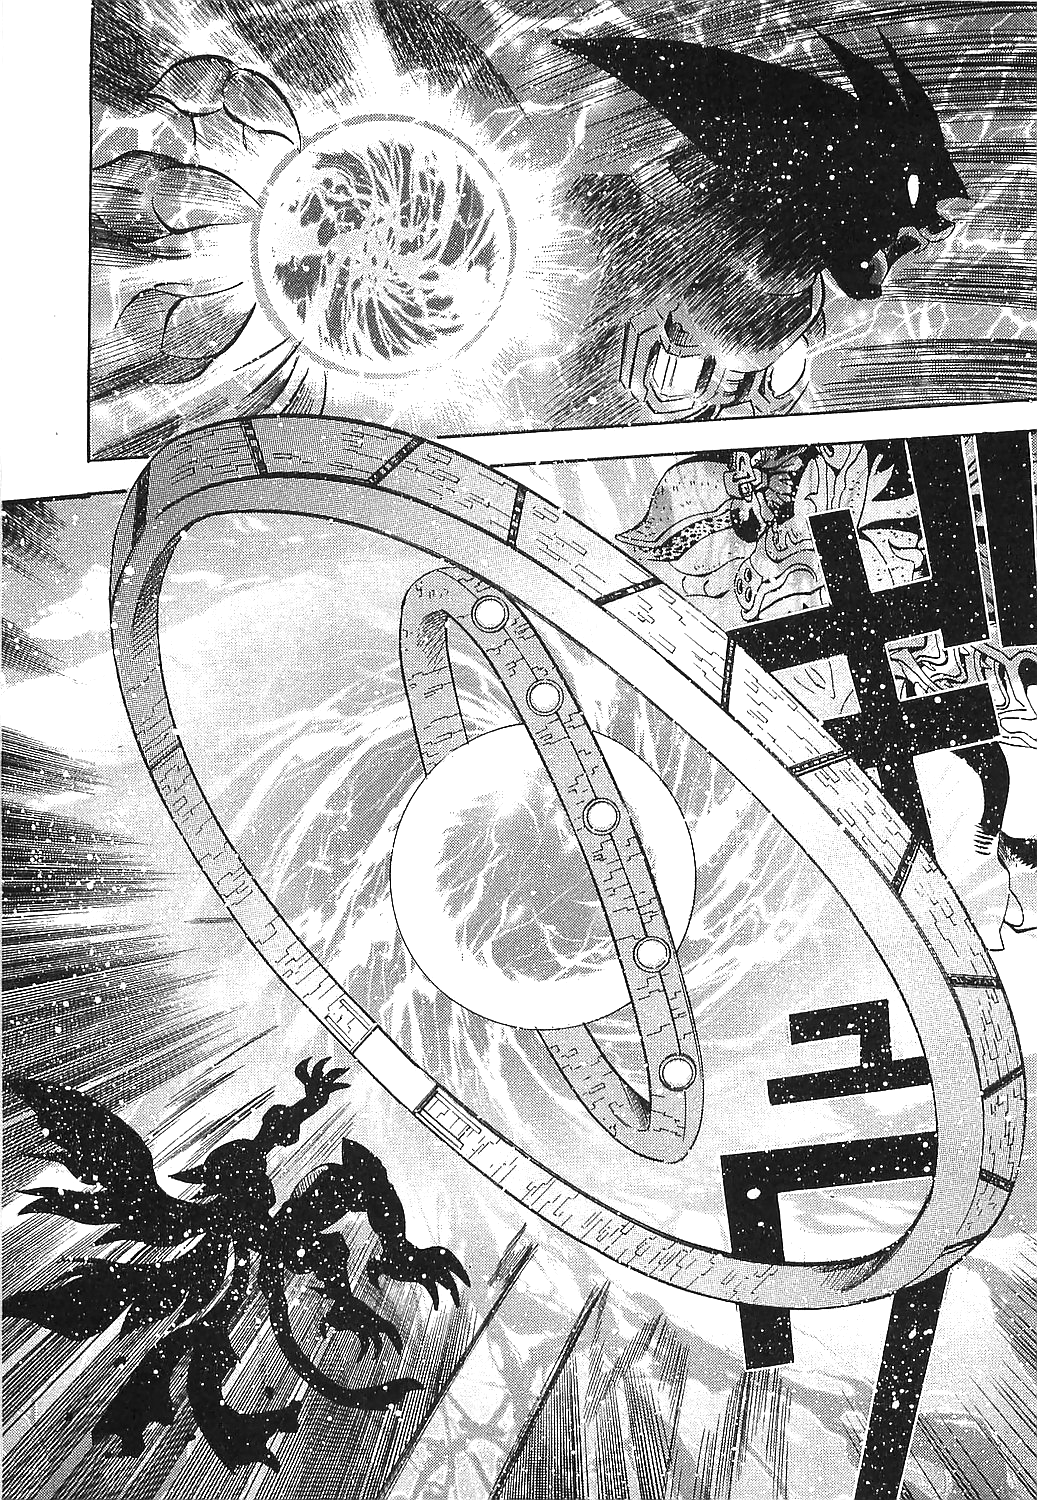 Getter Robo Hien - The Earth Suicide Vol.3 Chapter 17: End of the Journey